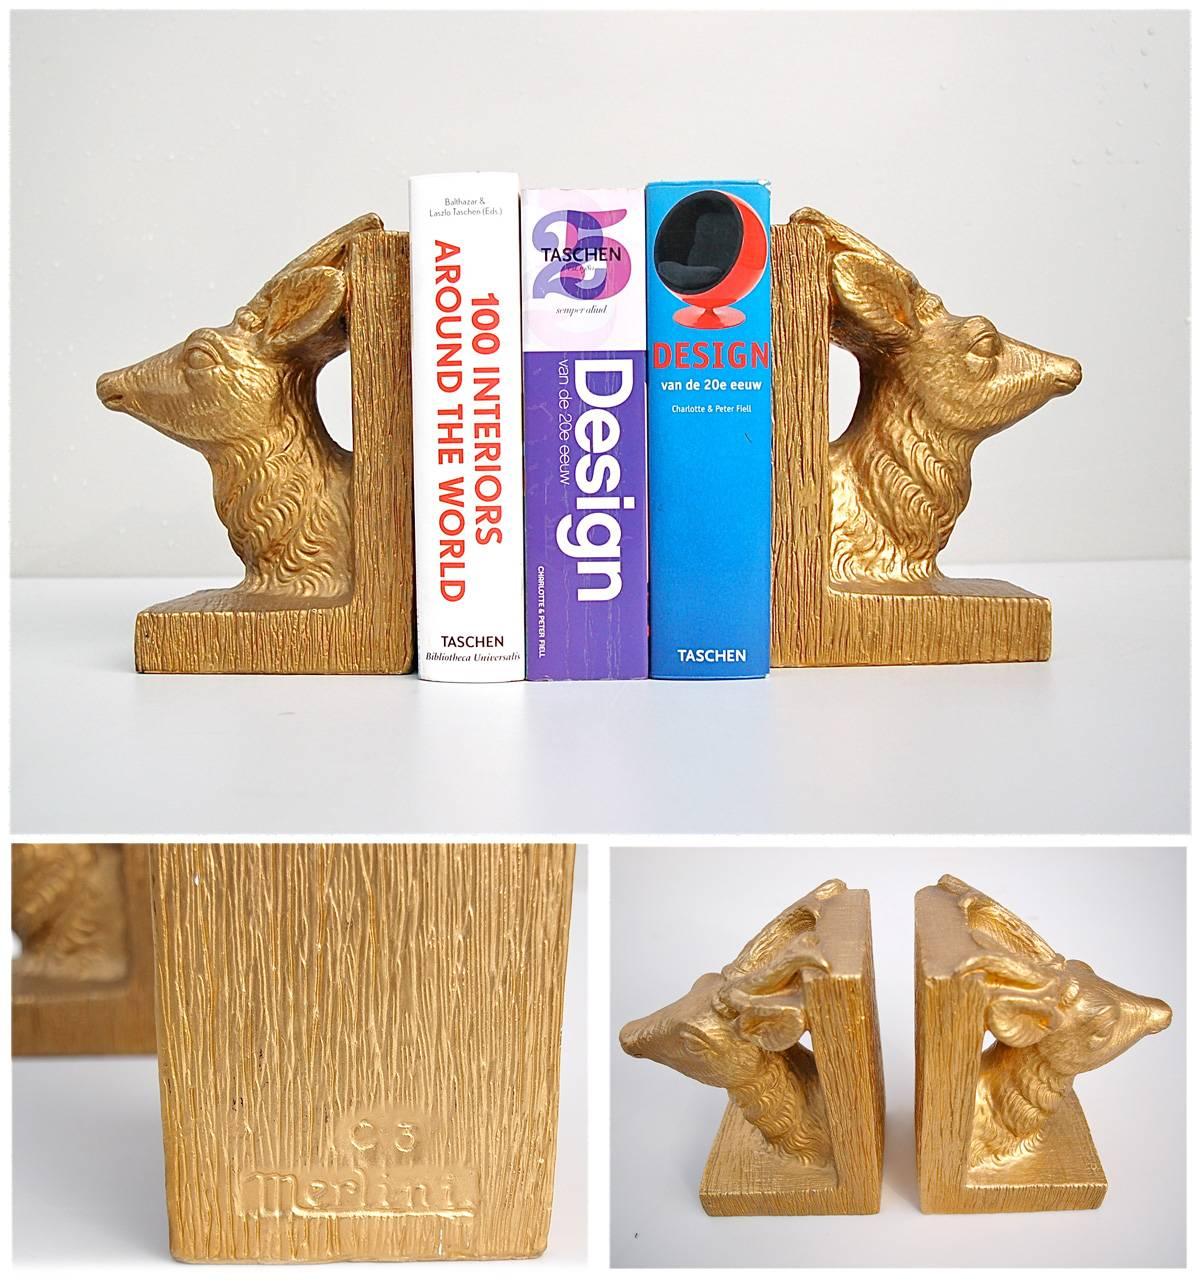 stag bookends